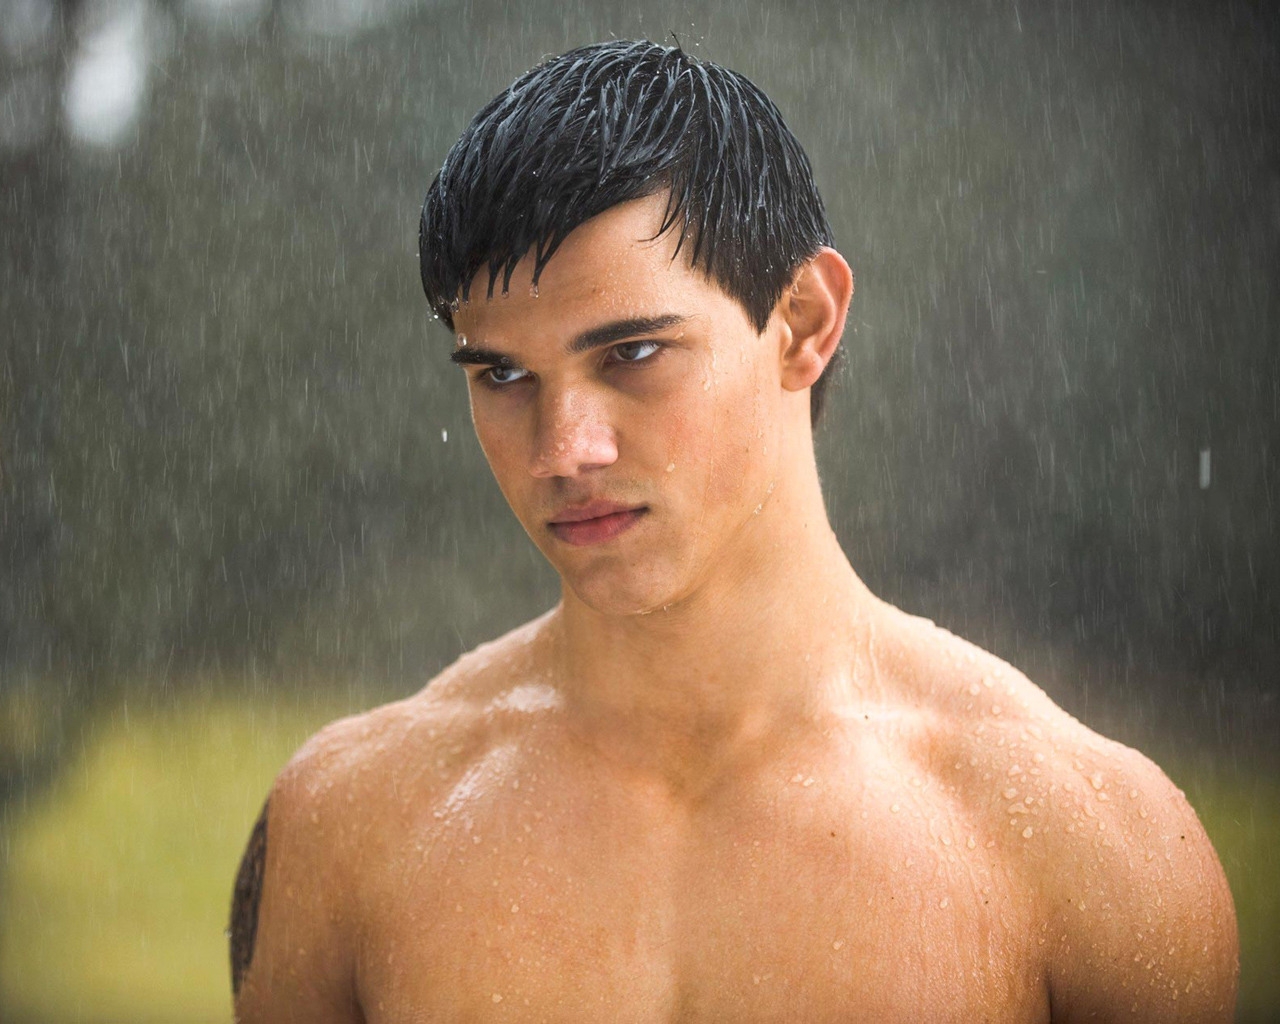 Hot Taylor Lautner for 1280 x 1024 resolution